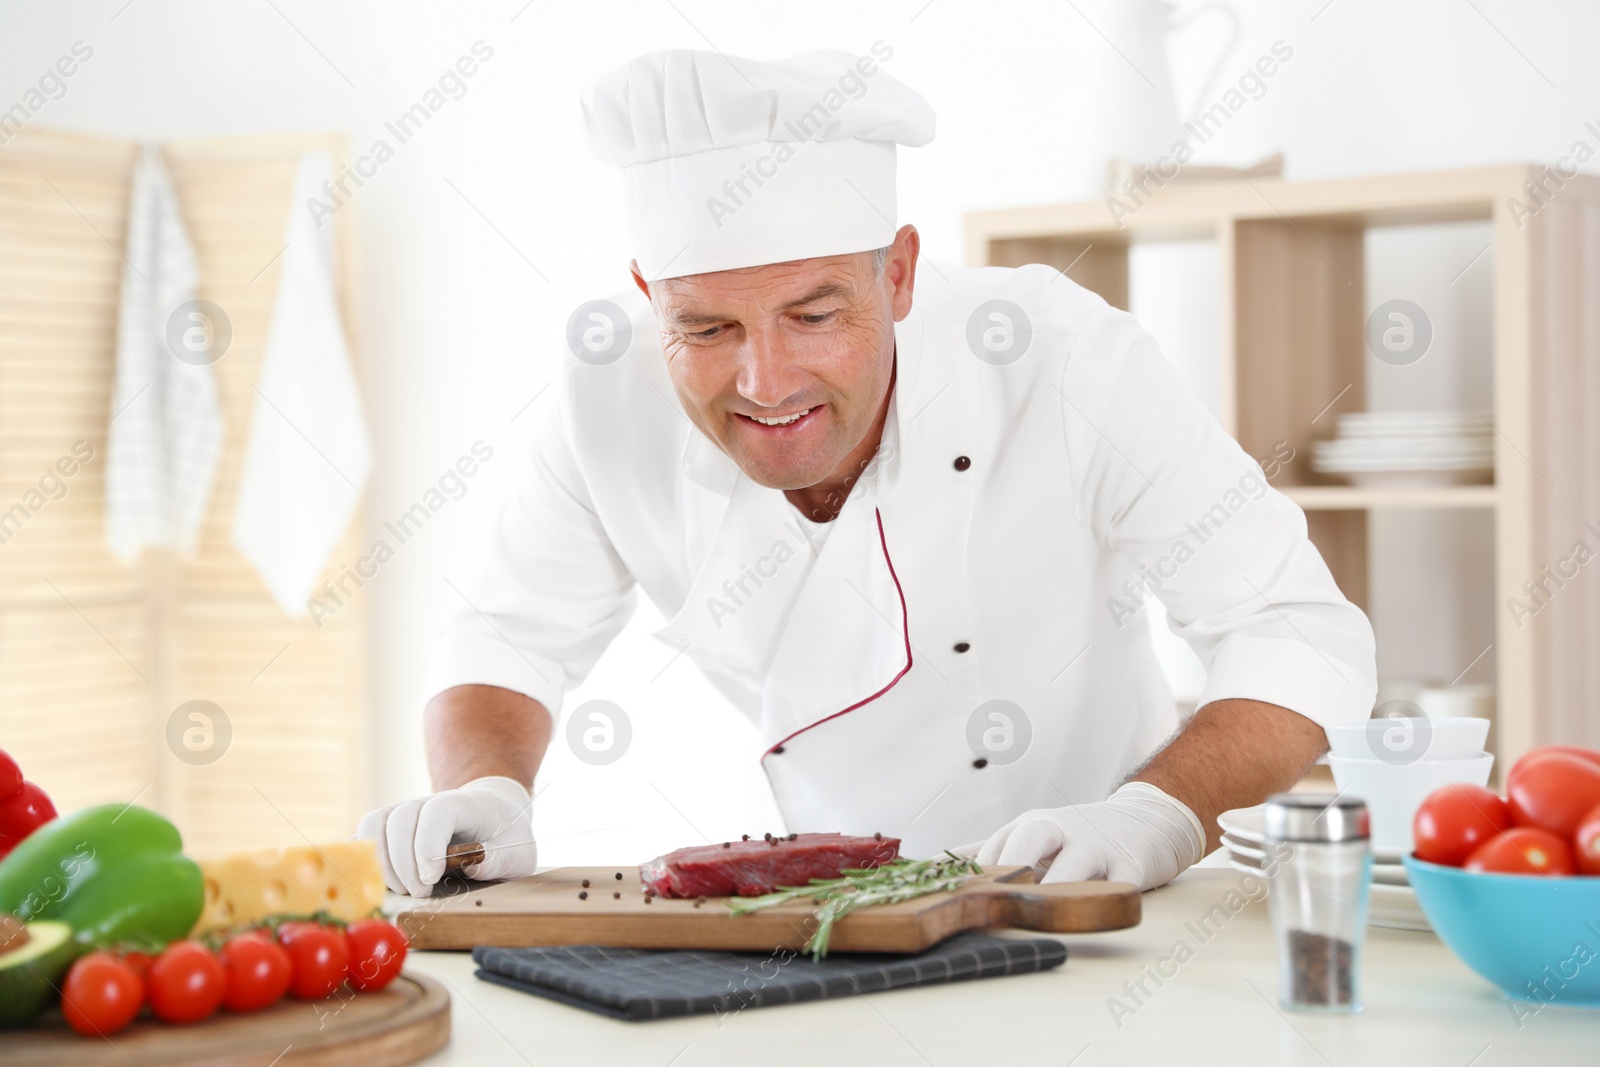 Photo of Professional chef cooking meat on table in kitchen